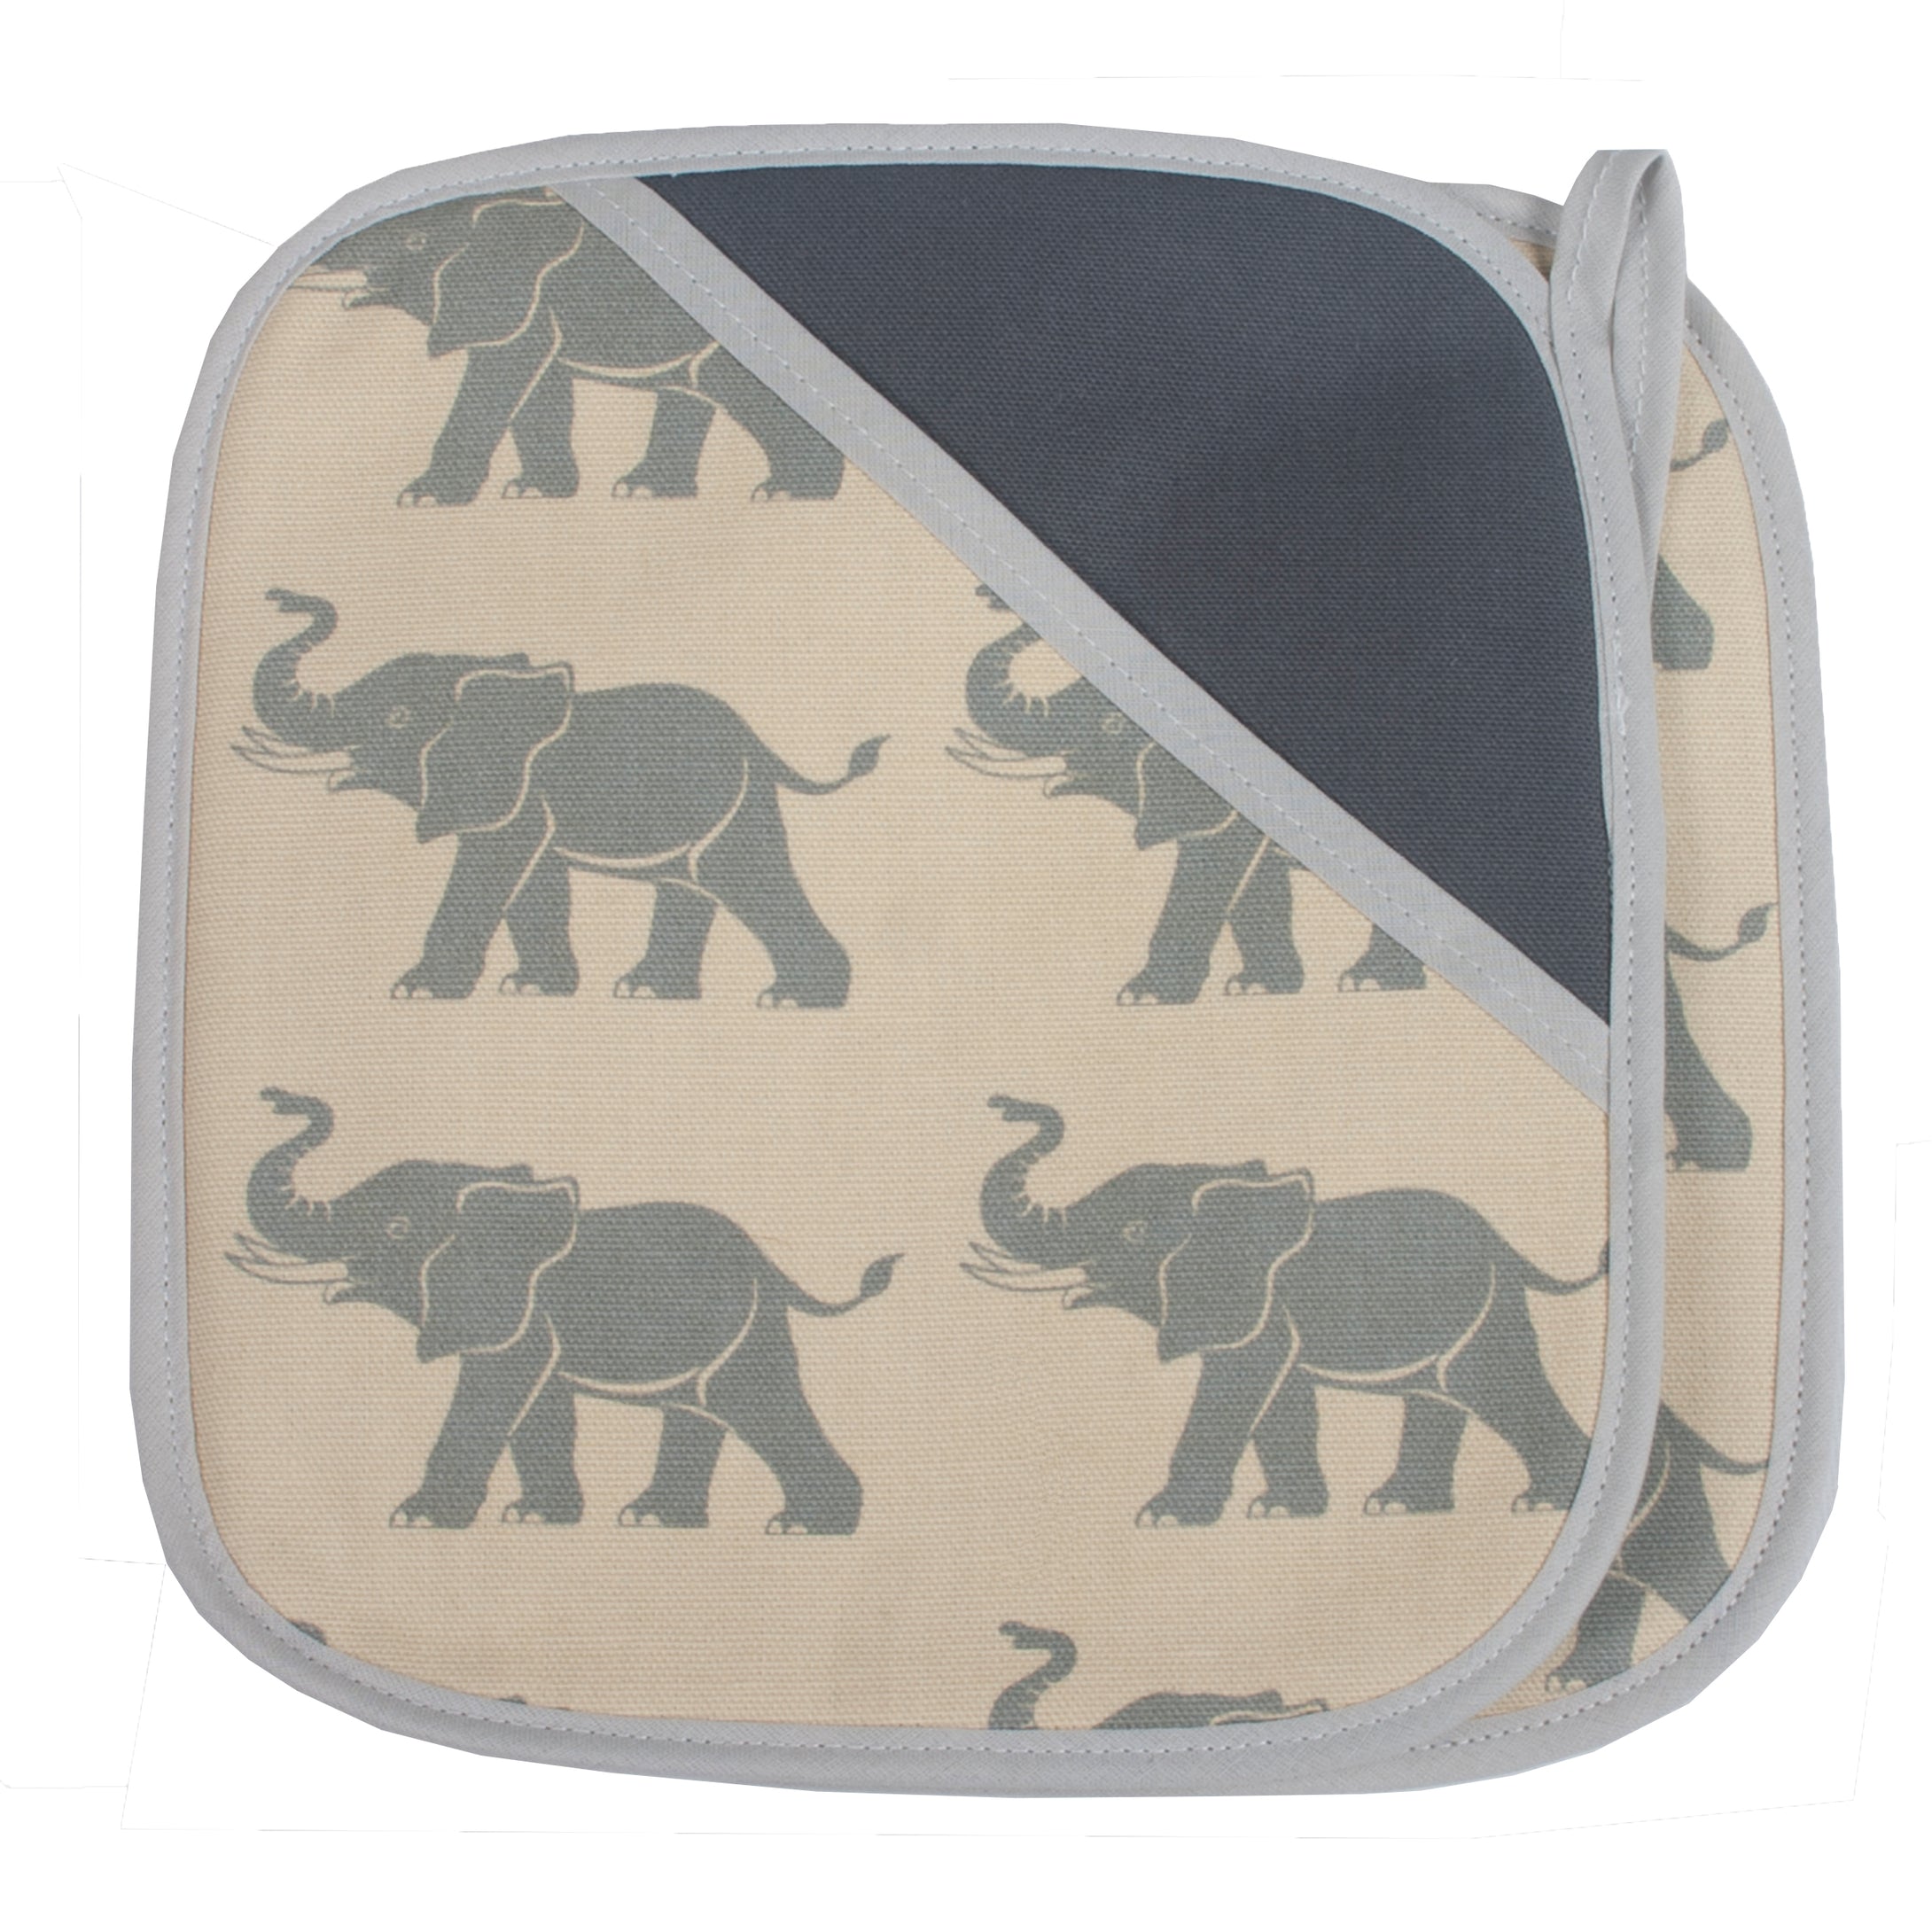 Oven Grippers, Yellow Elephants (pair)